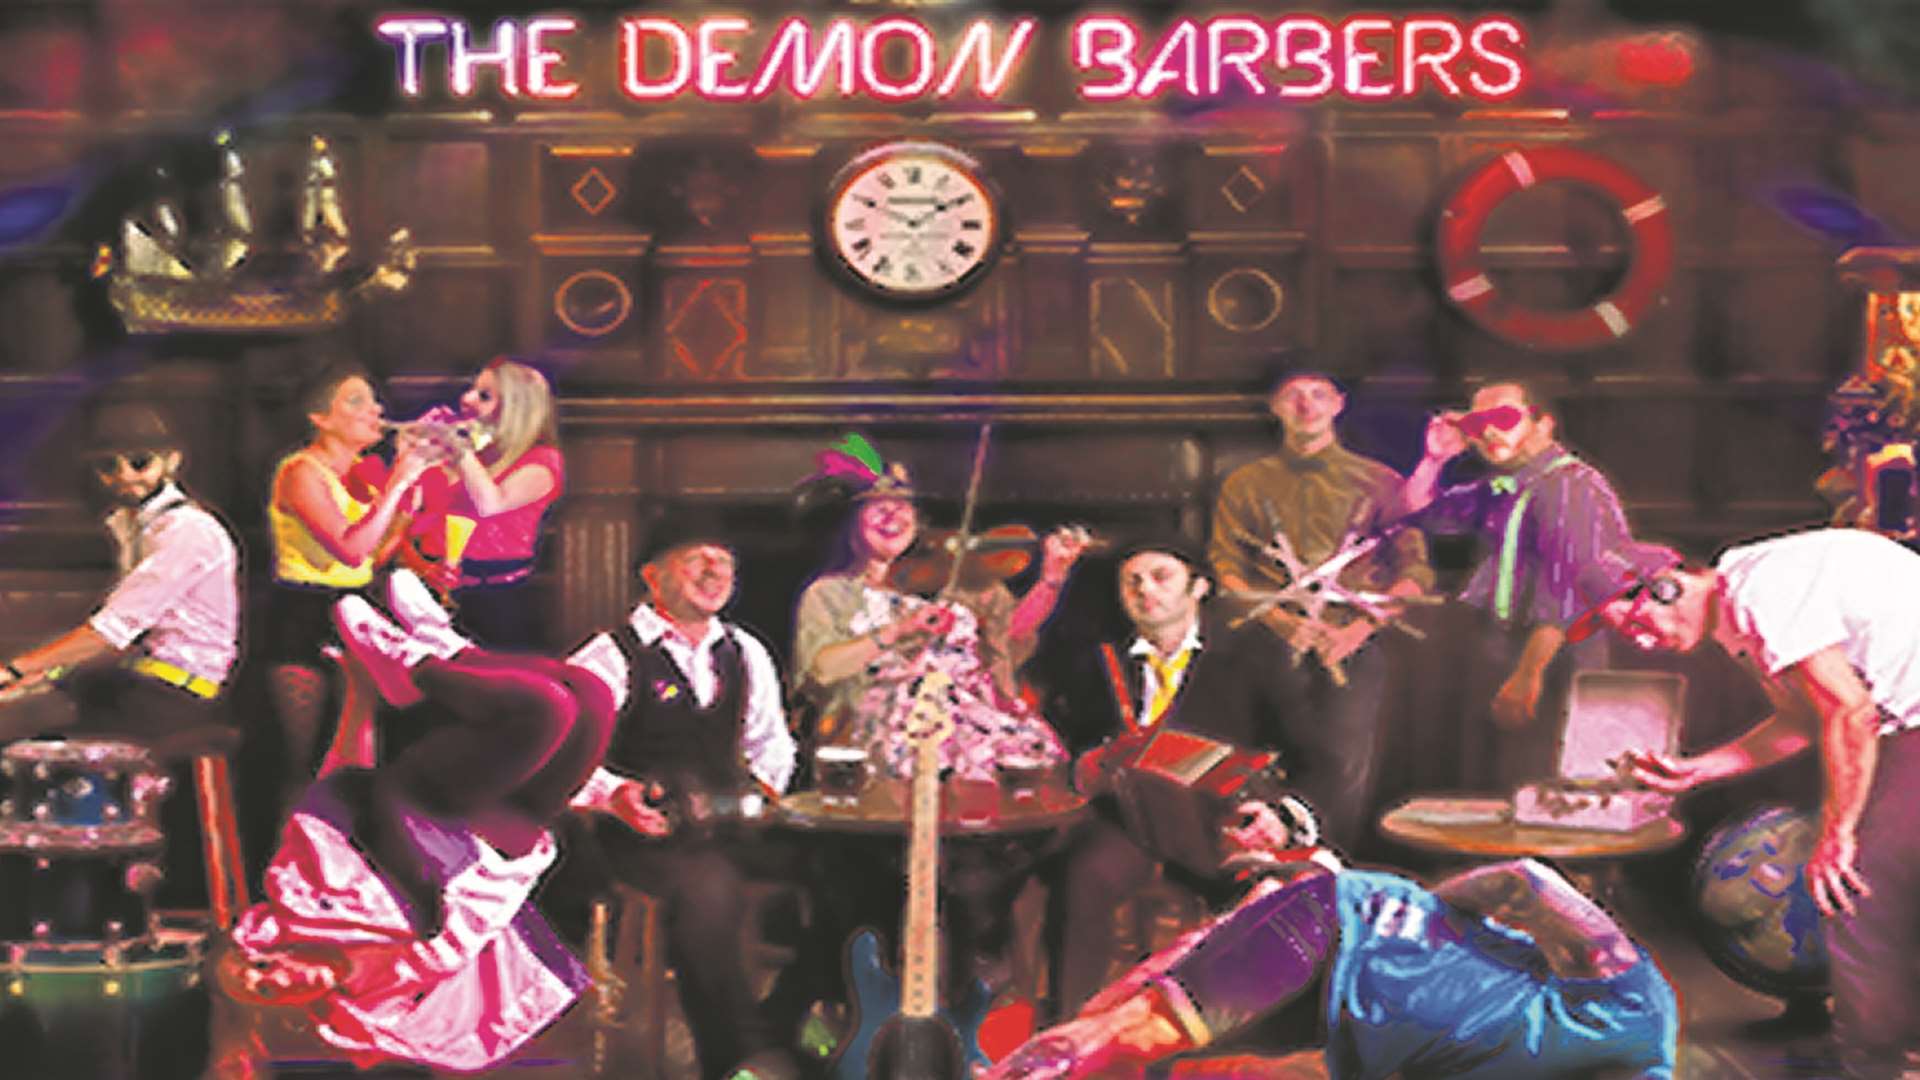 The Demon Barbers will be in Broadstairs